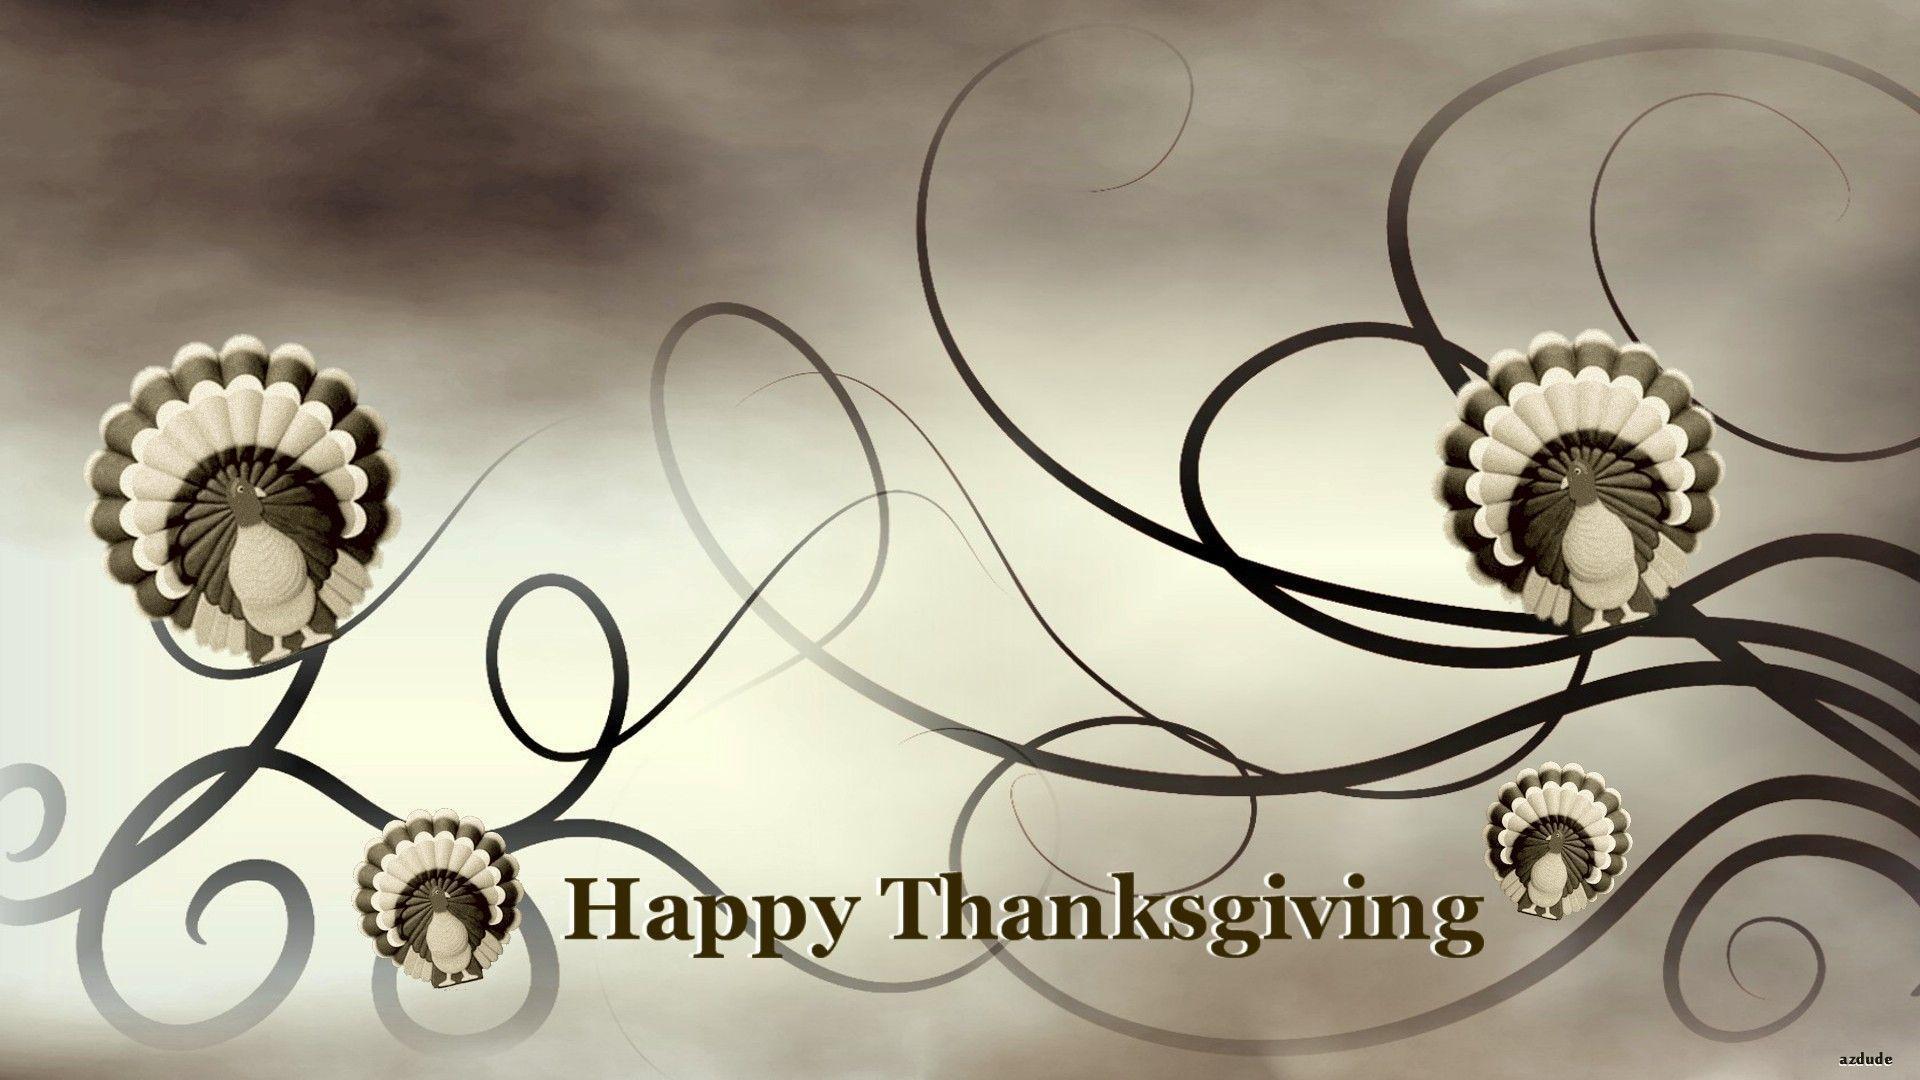 Happy Thanksgiving and Thanksgiving Turkey Wallpaper. Download